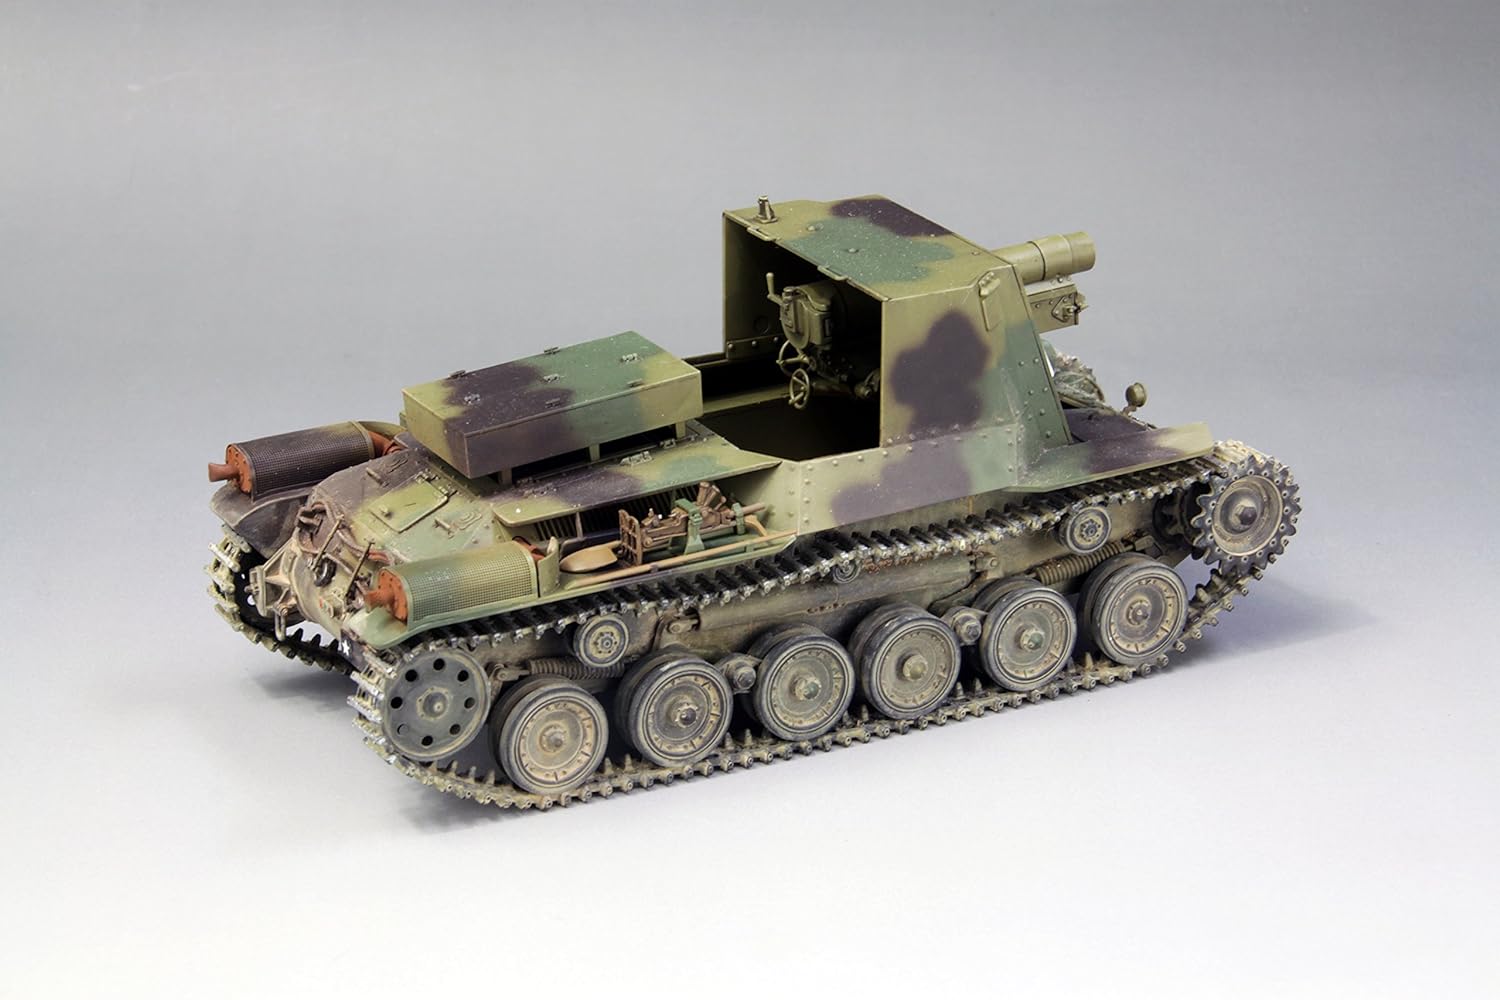 Fine Molds FM54 1/35 Scale Military Series Imperial Army Type 4 Self-Propelled Gun - BanzaiHobby